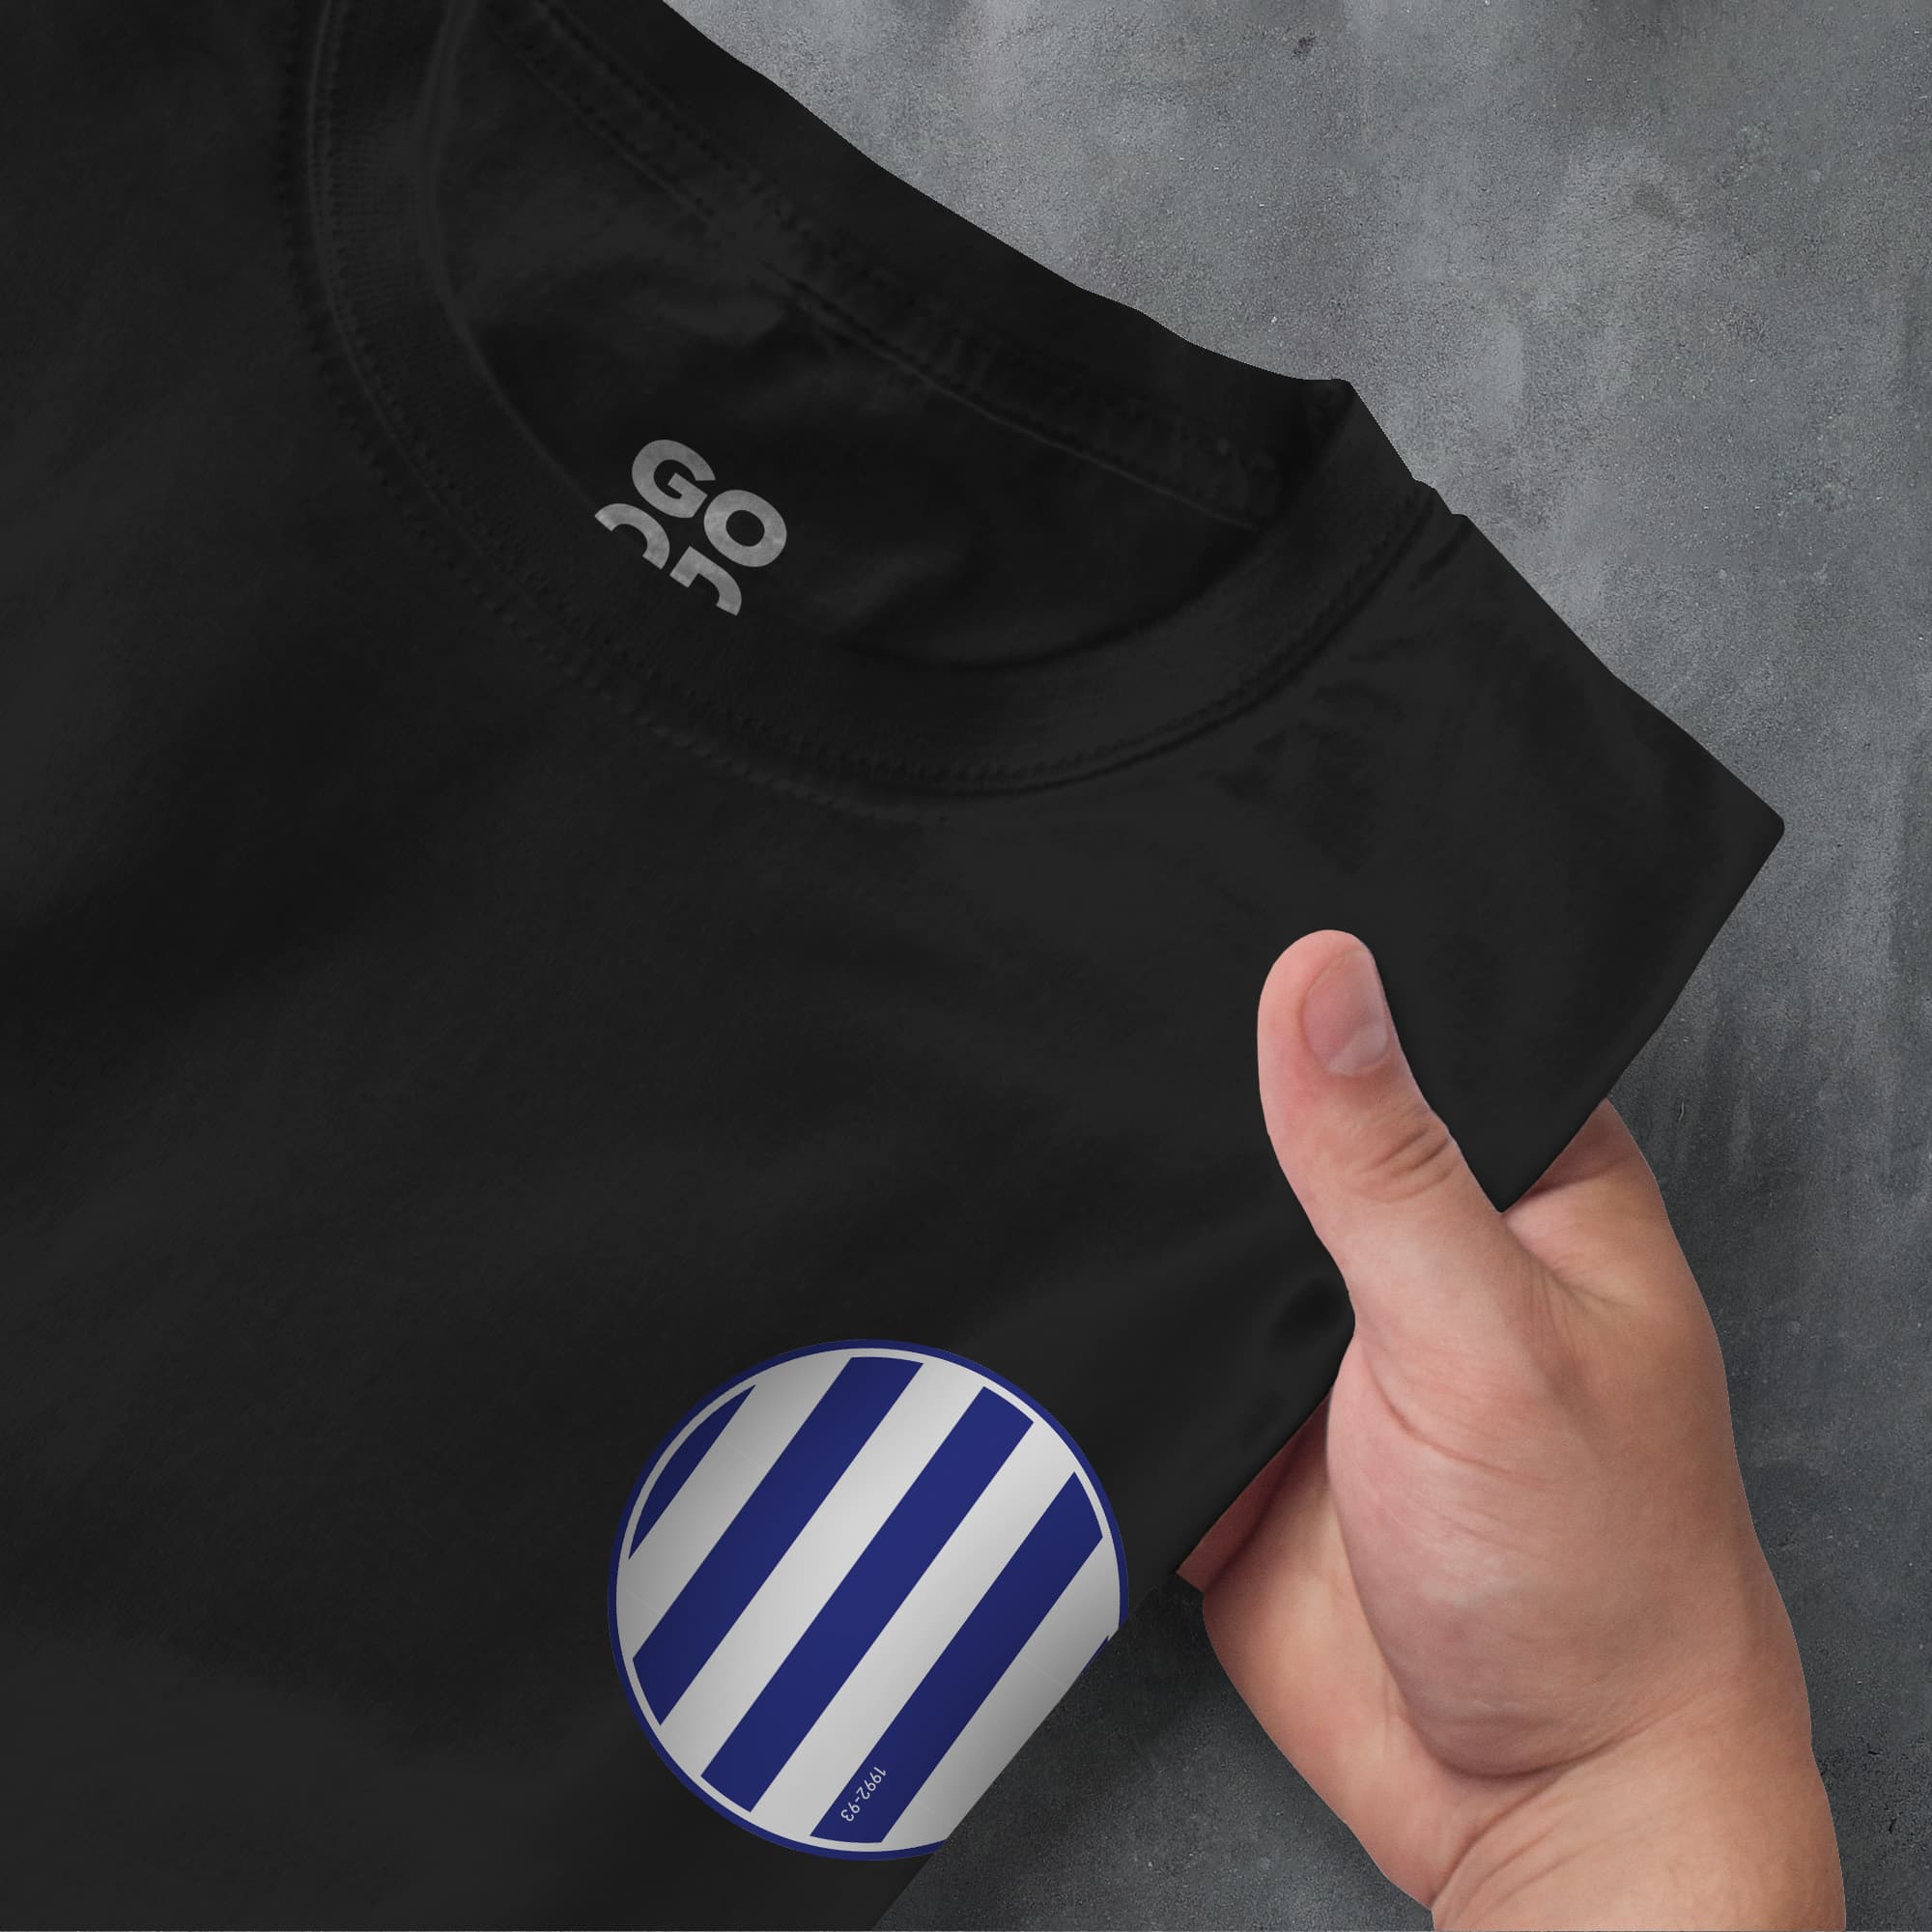 a person pointing at a black shirt with blue and white stripes